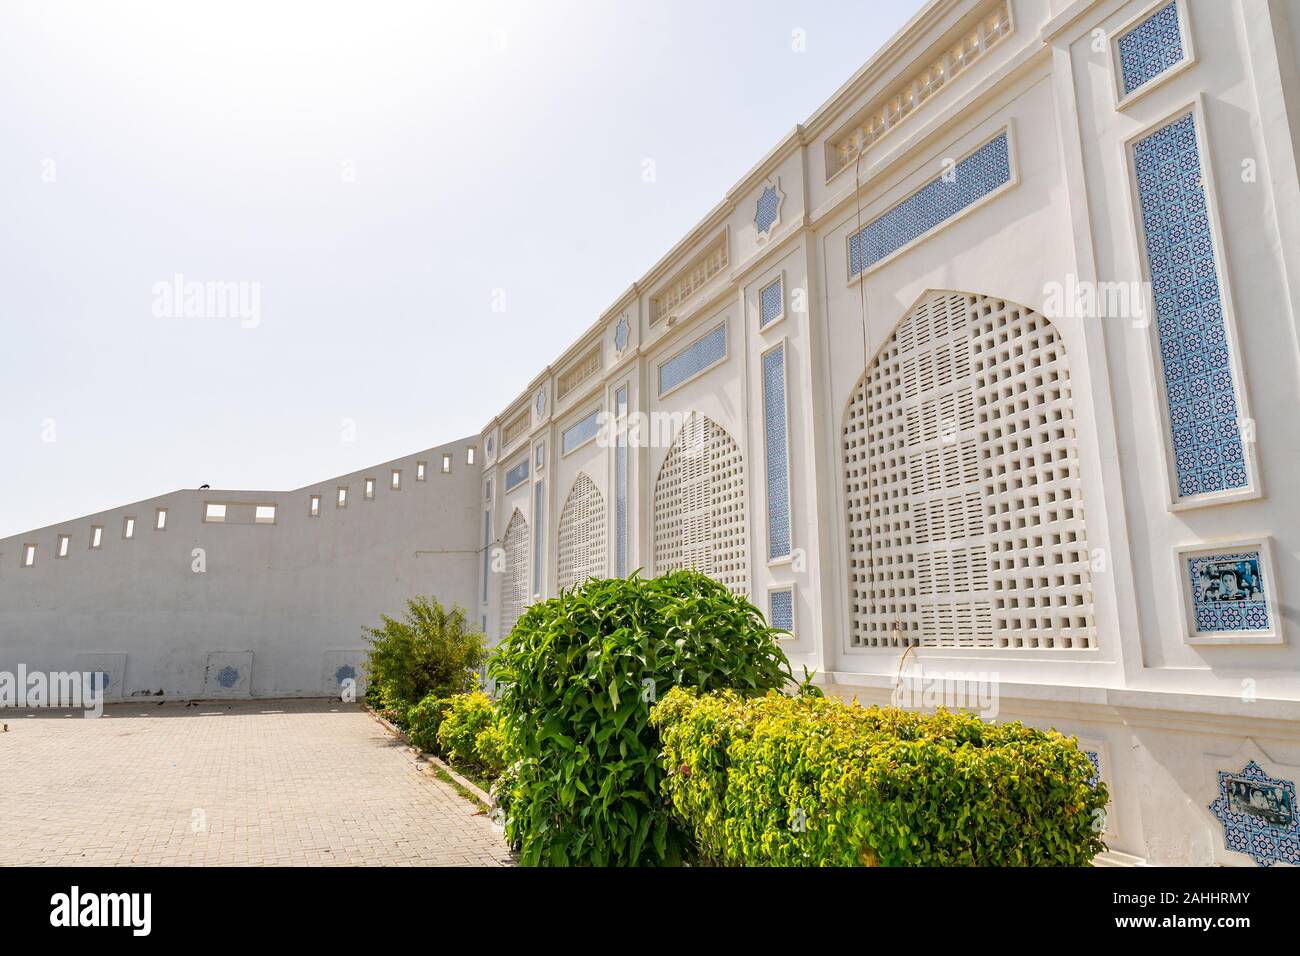 Larkana Bhutto Family Mausoleum Picturesque View of the Facade Windows on a Sunny Blue Sky Day Stock Photo